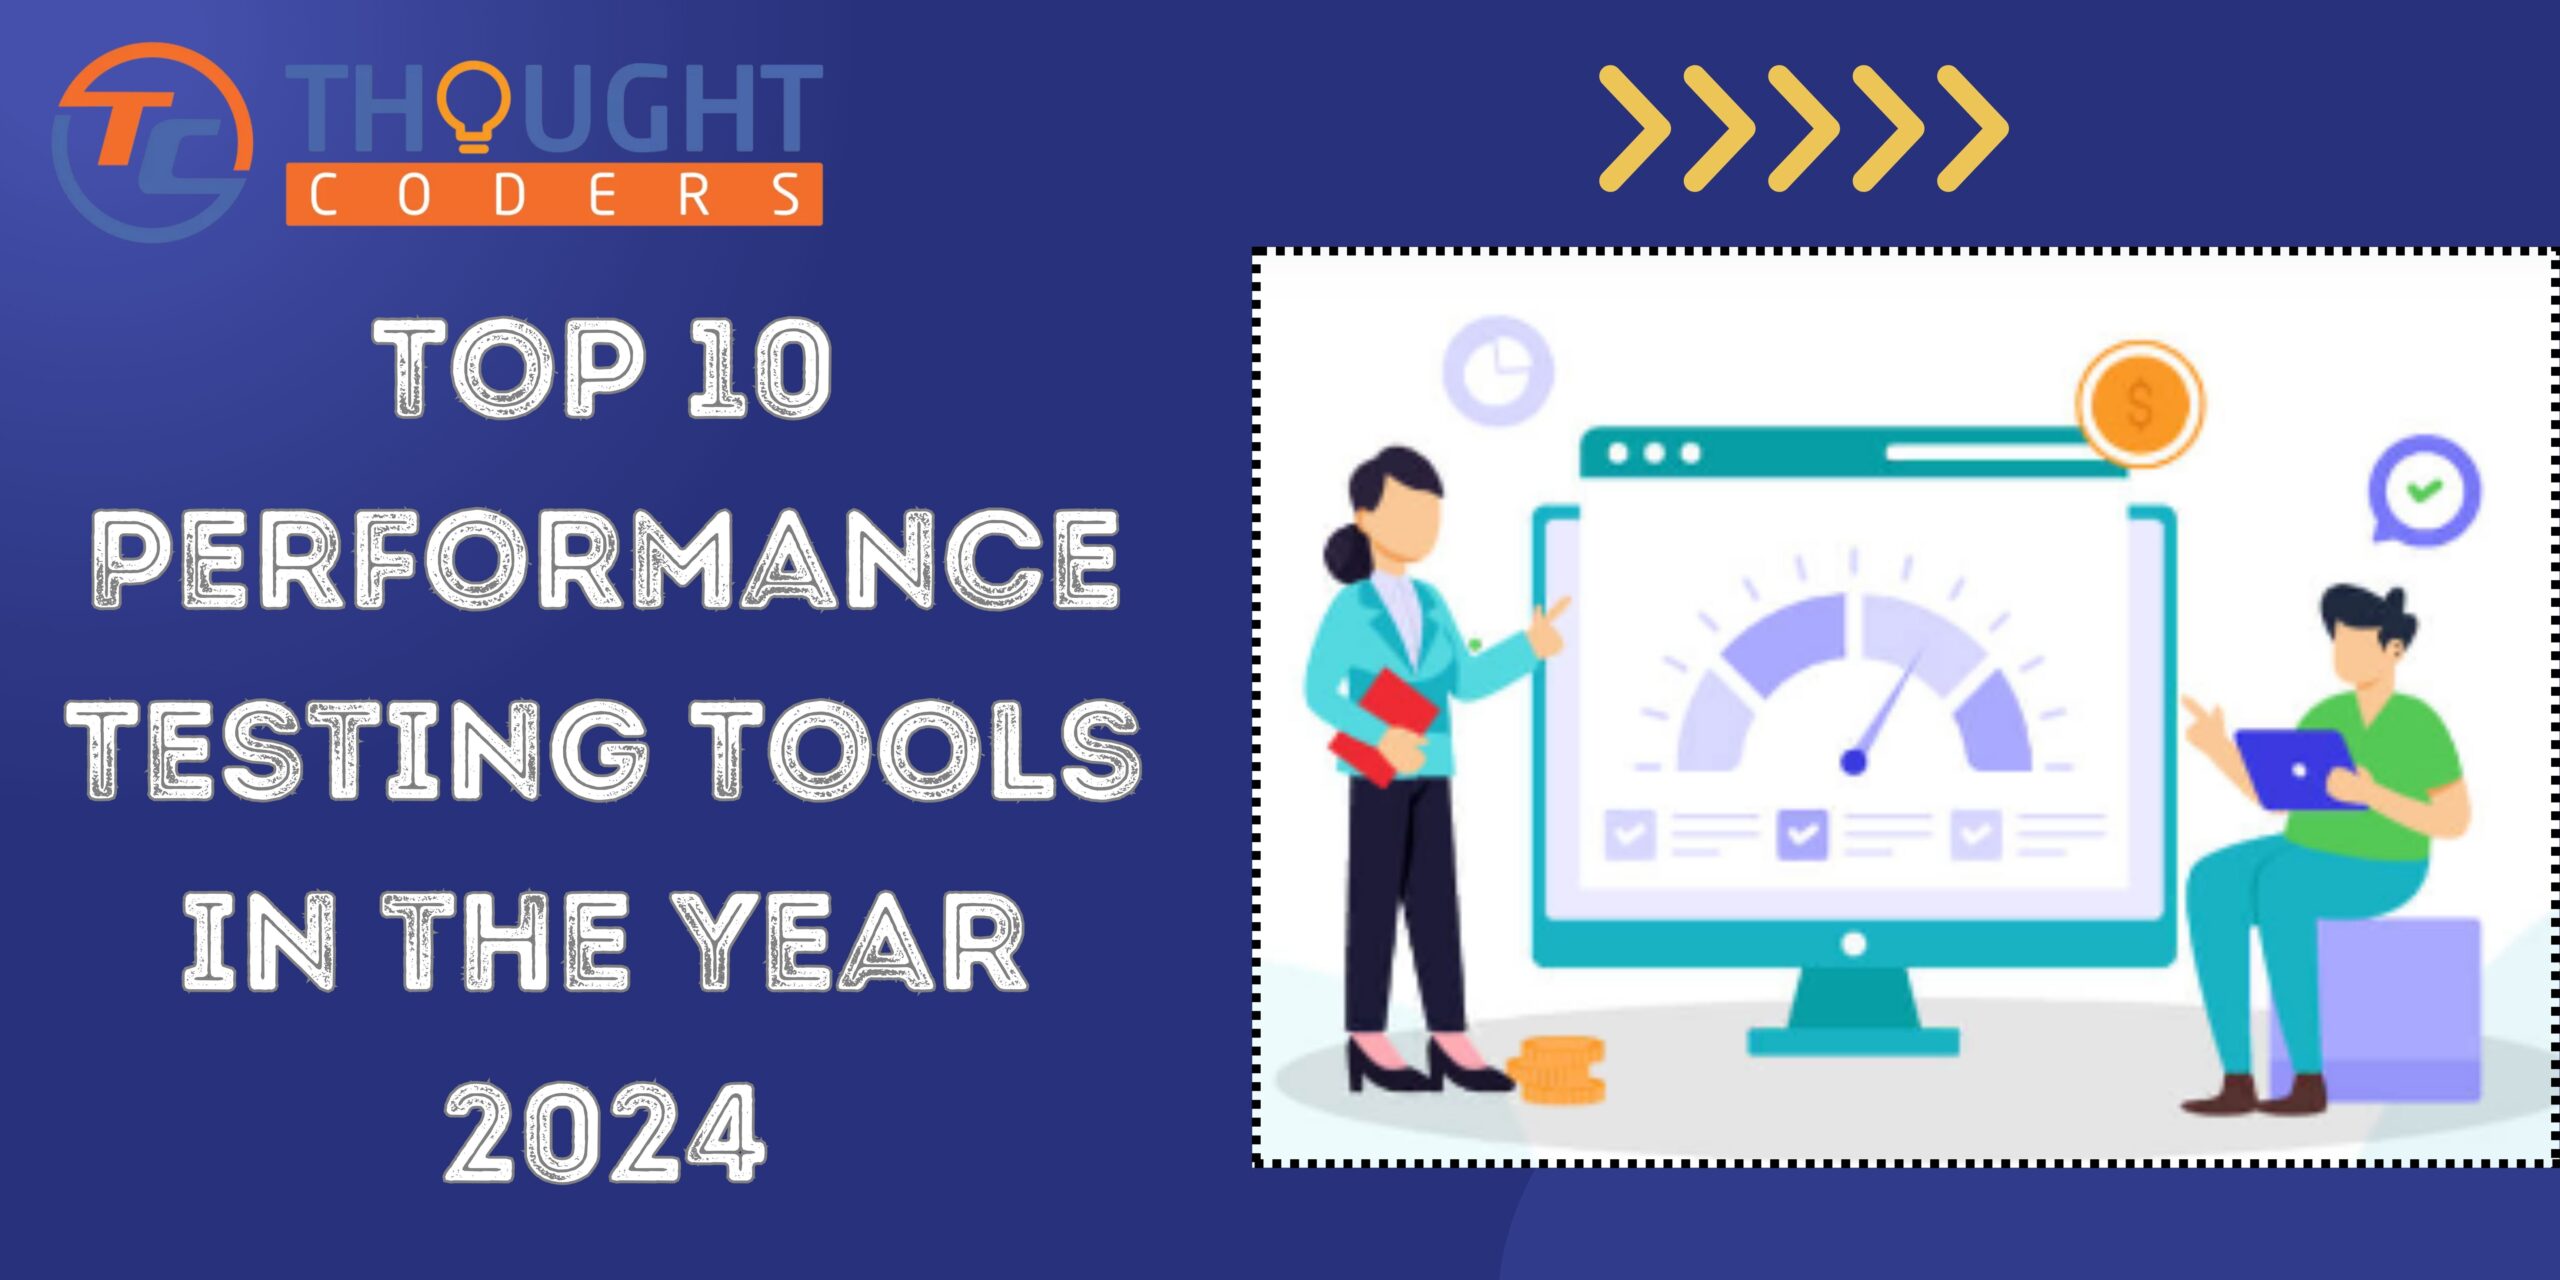 Top 10 Performance Testing Tools in the Year 2024